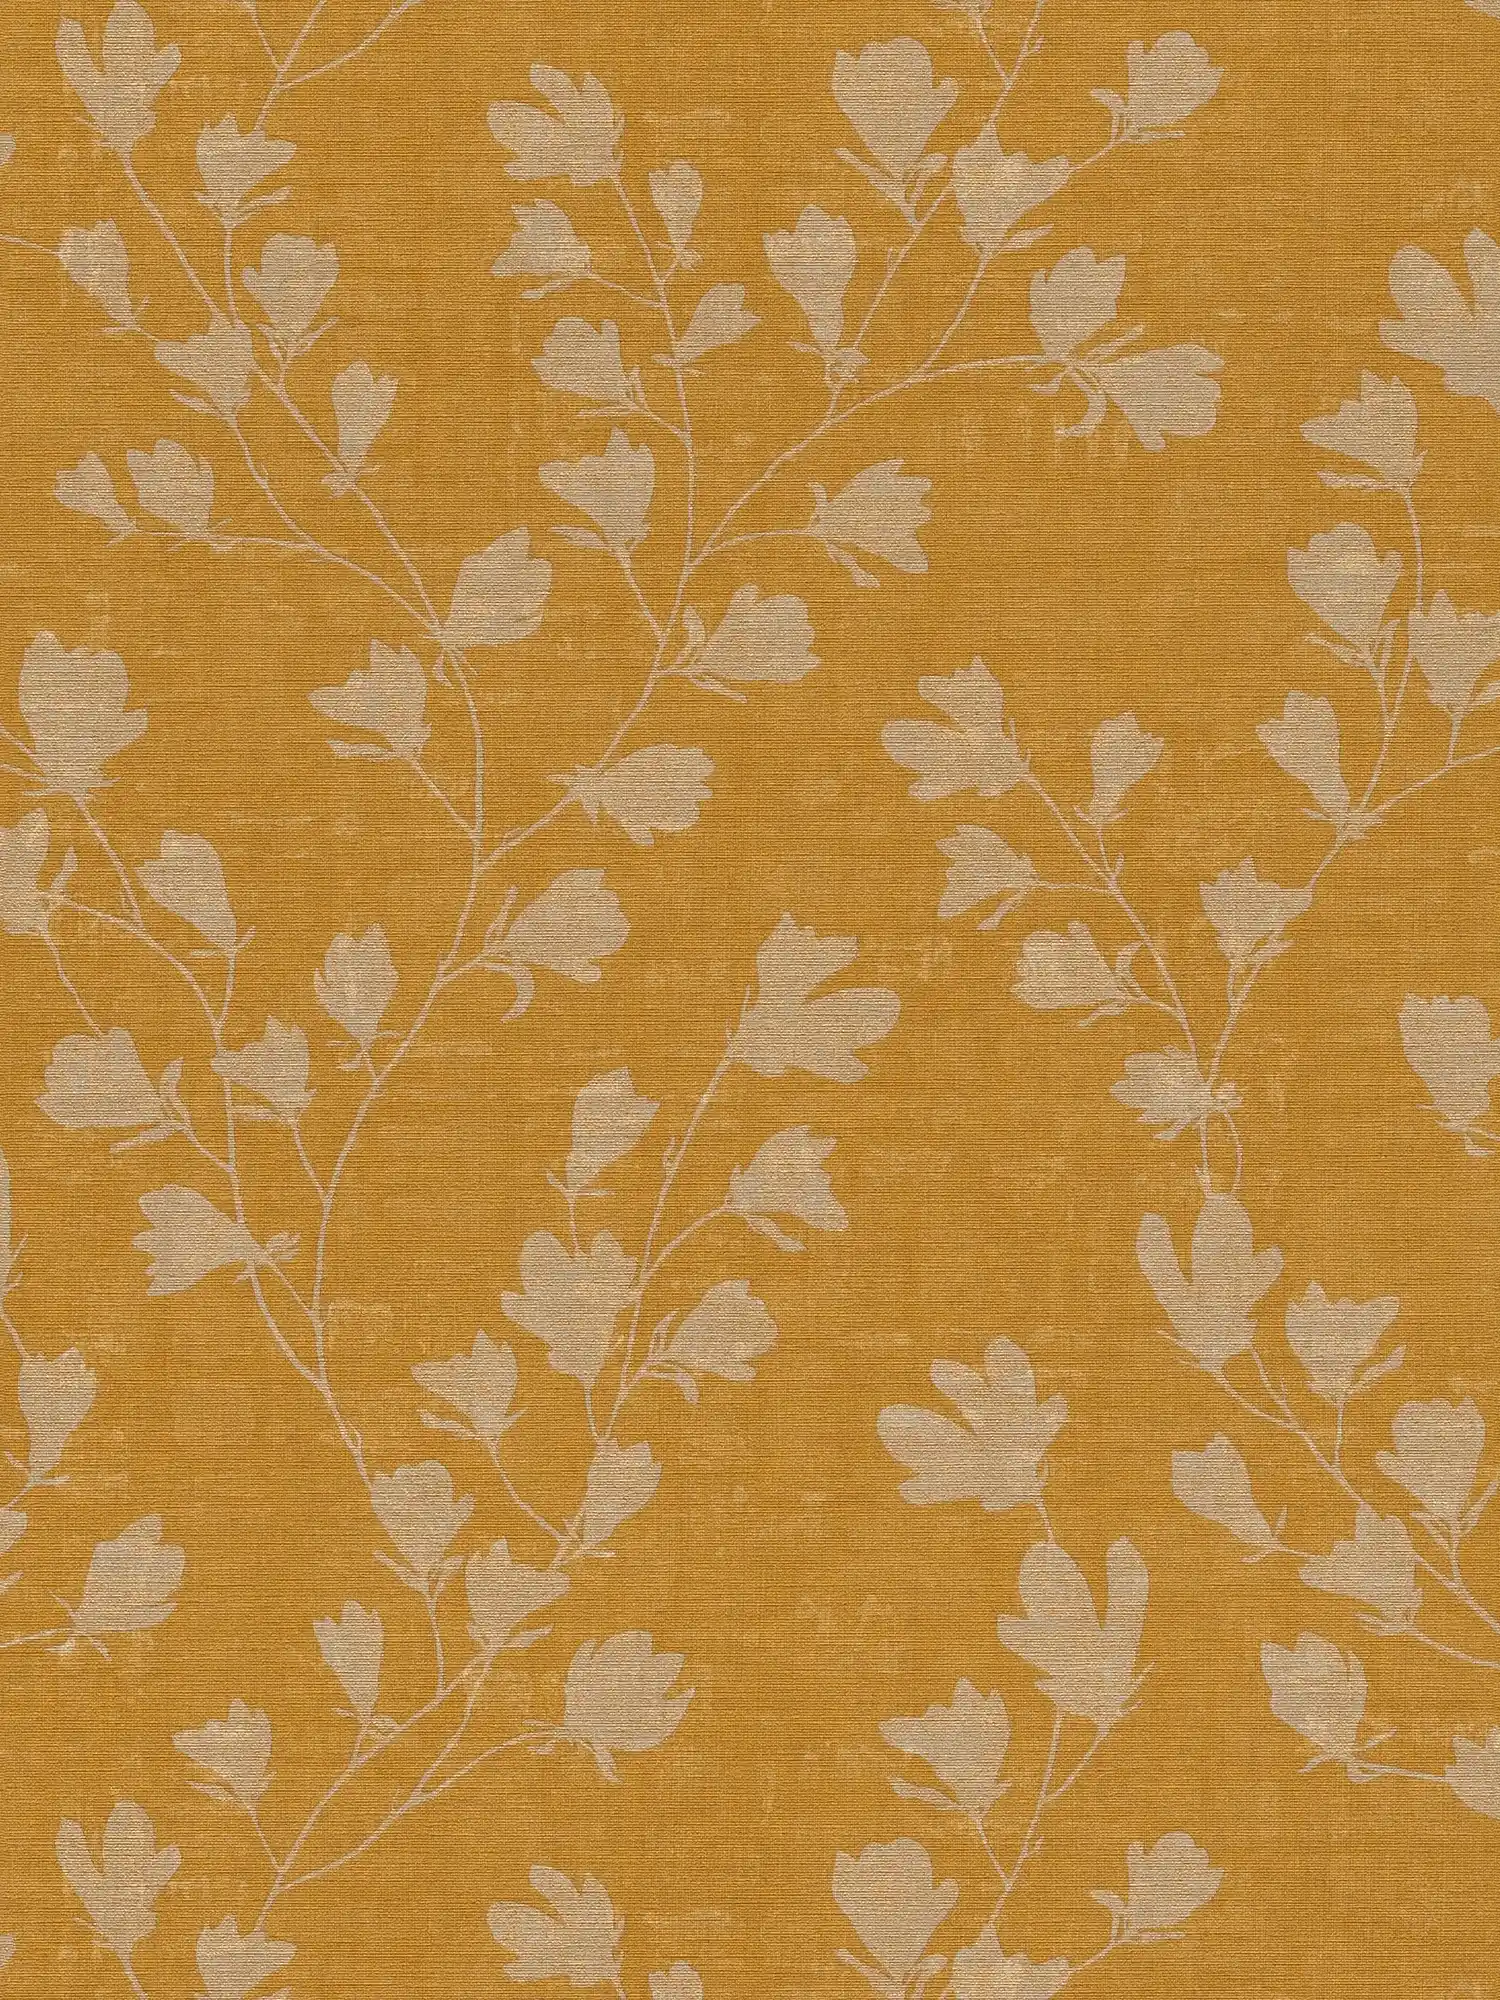 Non-woven wallpaper plain with mottled effect - yellow
